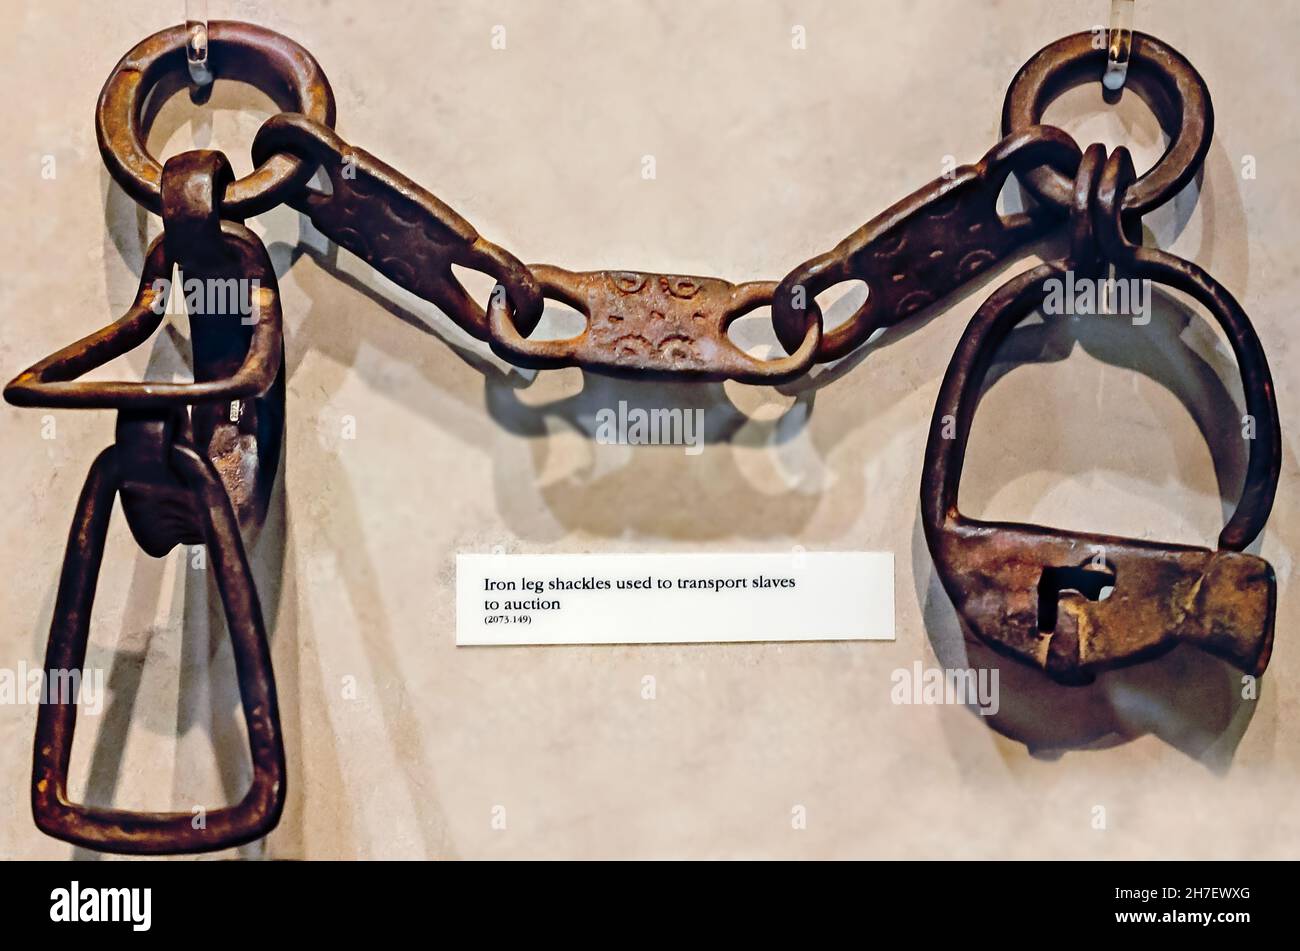 Iron leg shackles used to transport slaves to auction are displayed at the History Museum of Mobile, March 19, 2019, in Mobile, Alabama. Stock Photo